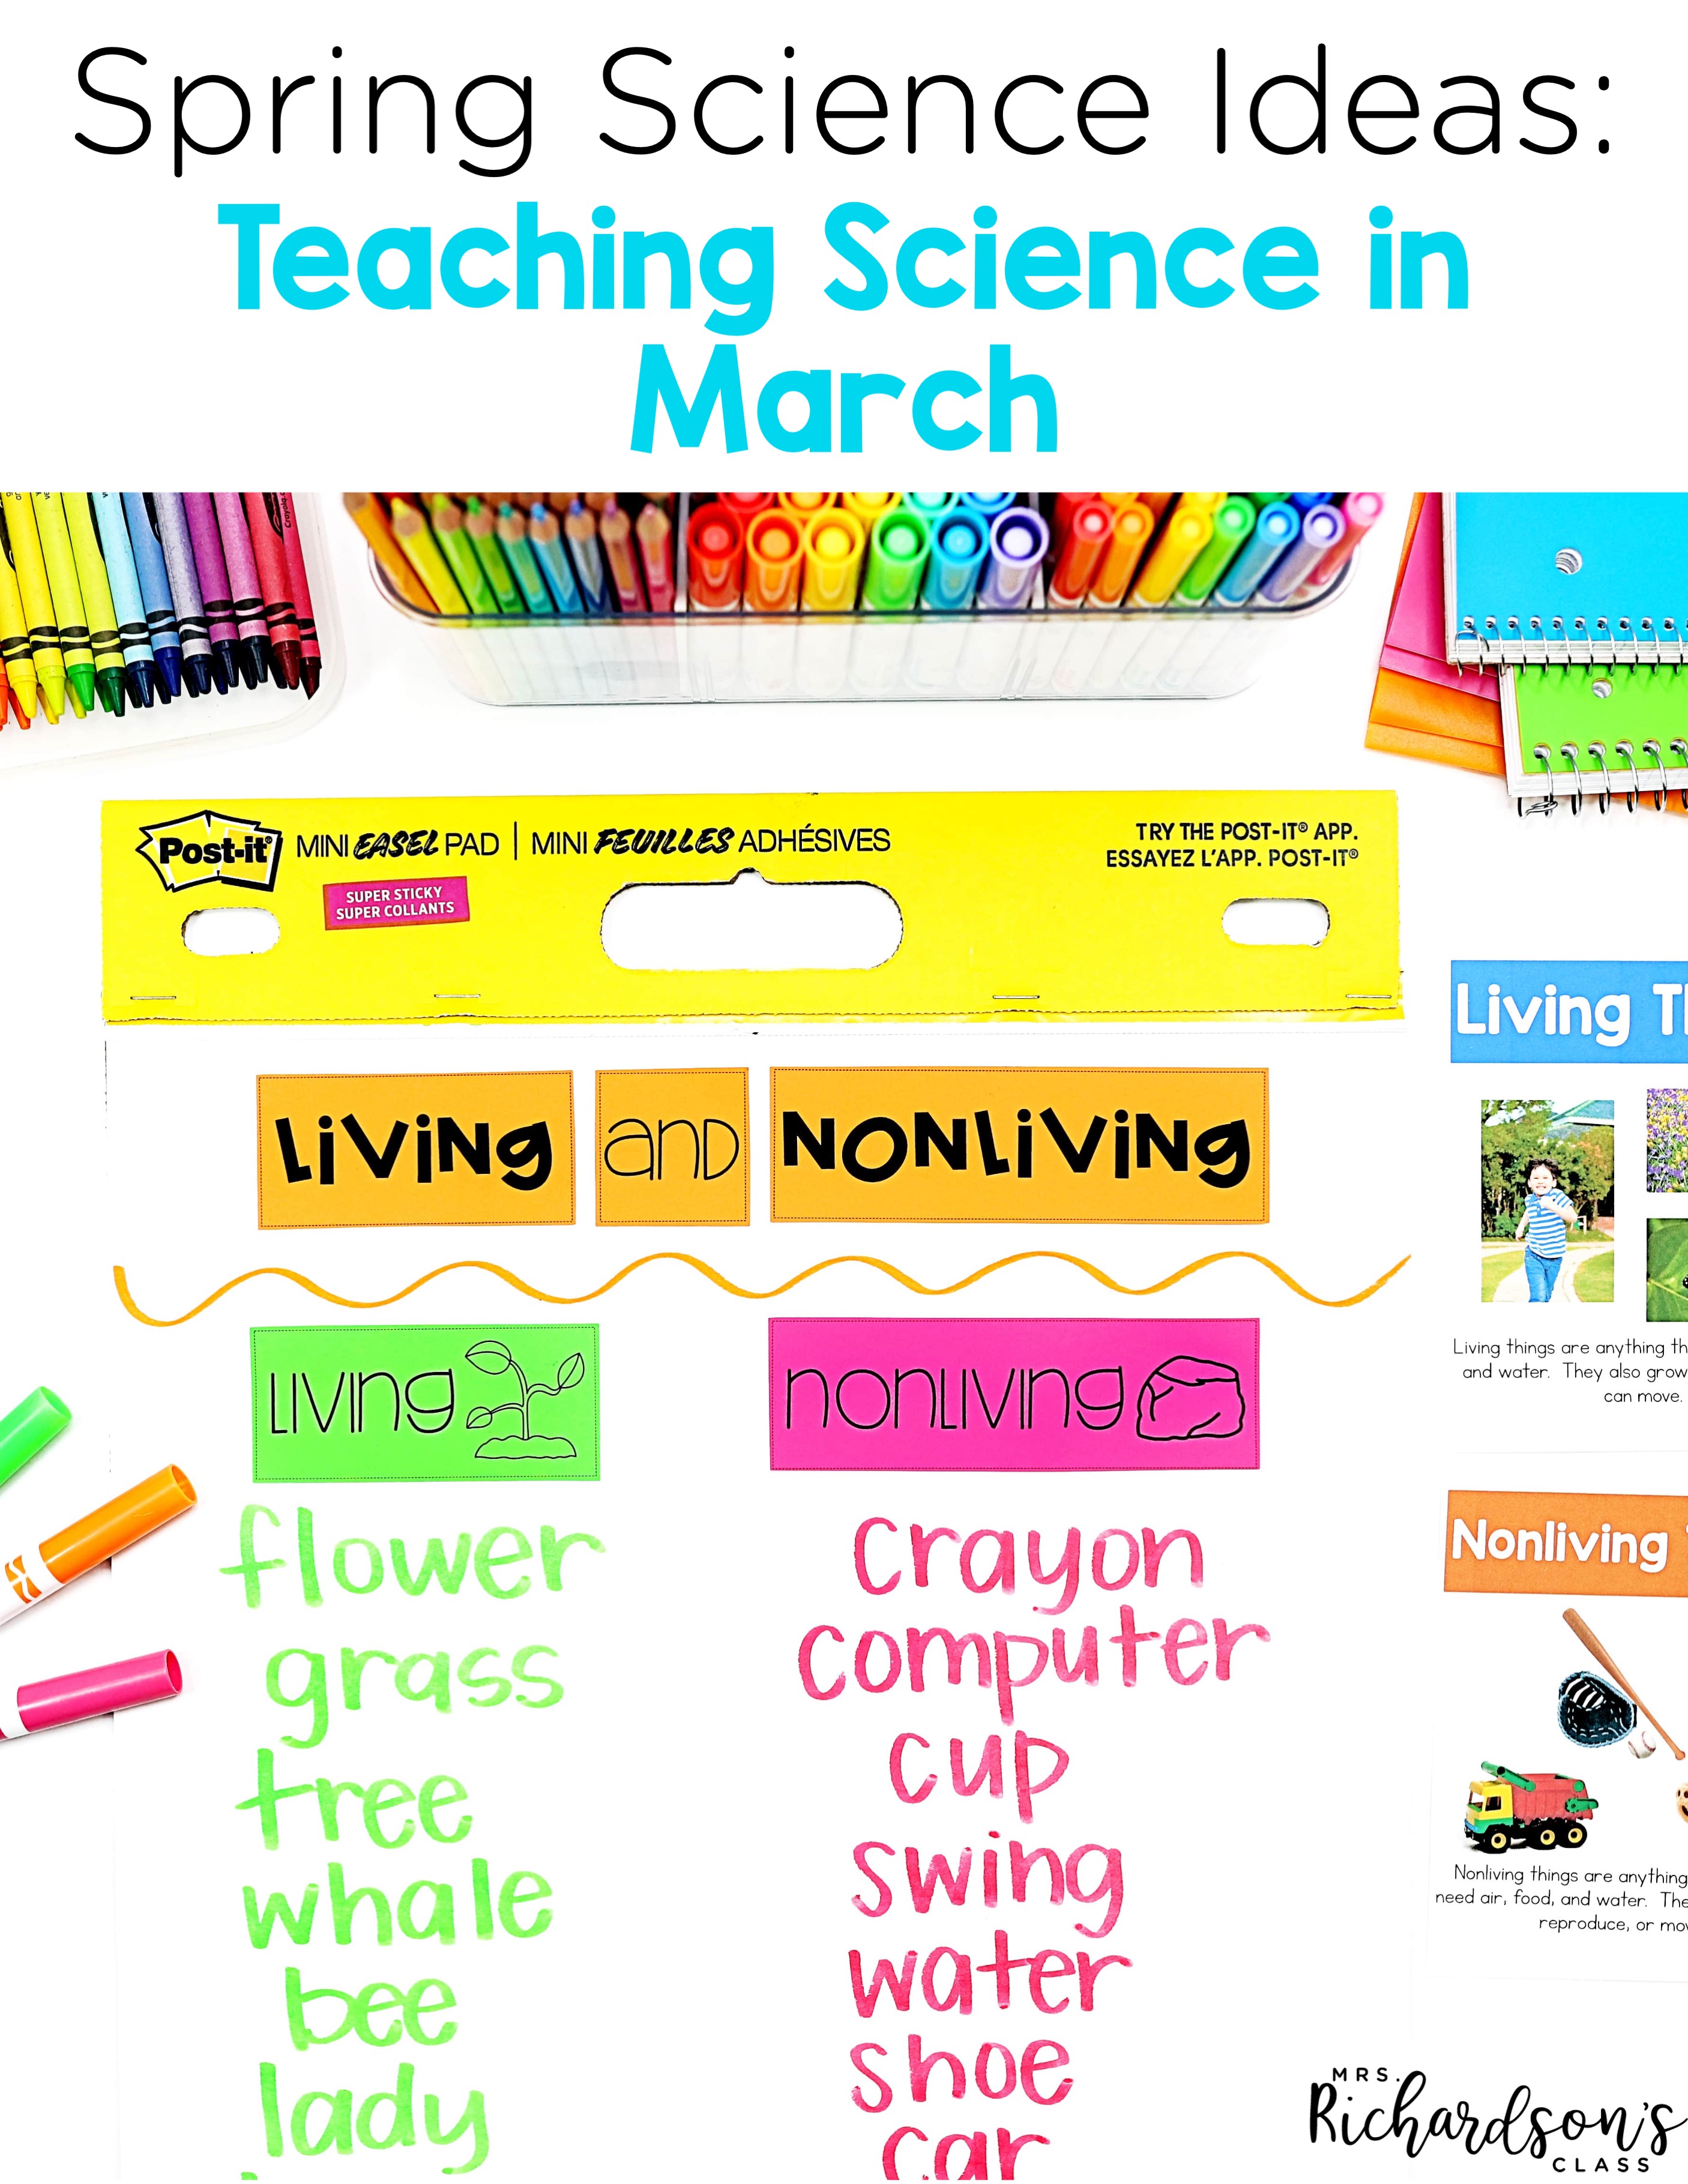 Students will enjoy exploring plants, plant parts, insects, insect life cycles, water, clouds, and living and nonliving things all month with Science for March! They will stay engaged through whole group and independent activities, science experiments, shared reading, and close reading activities, too! 